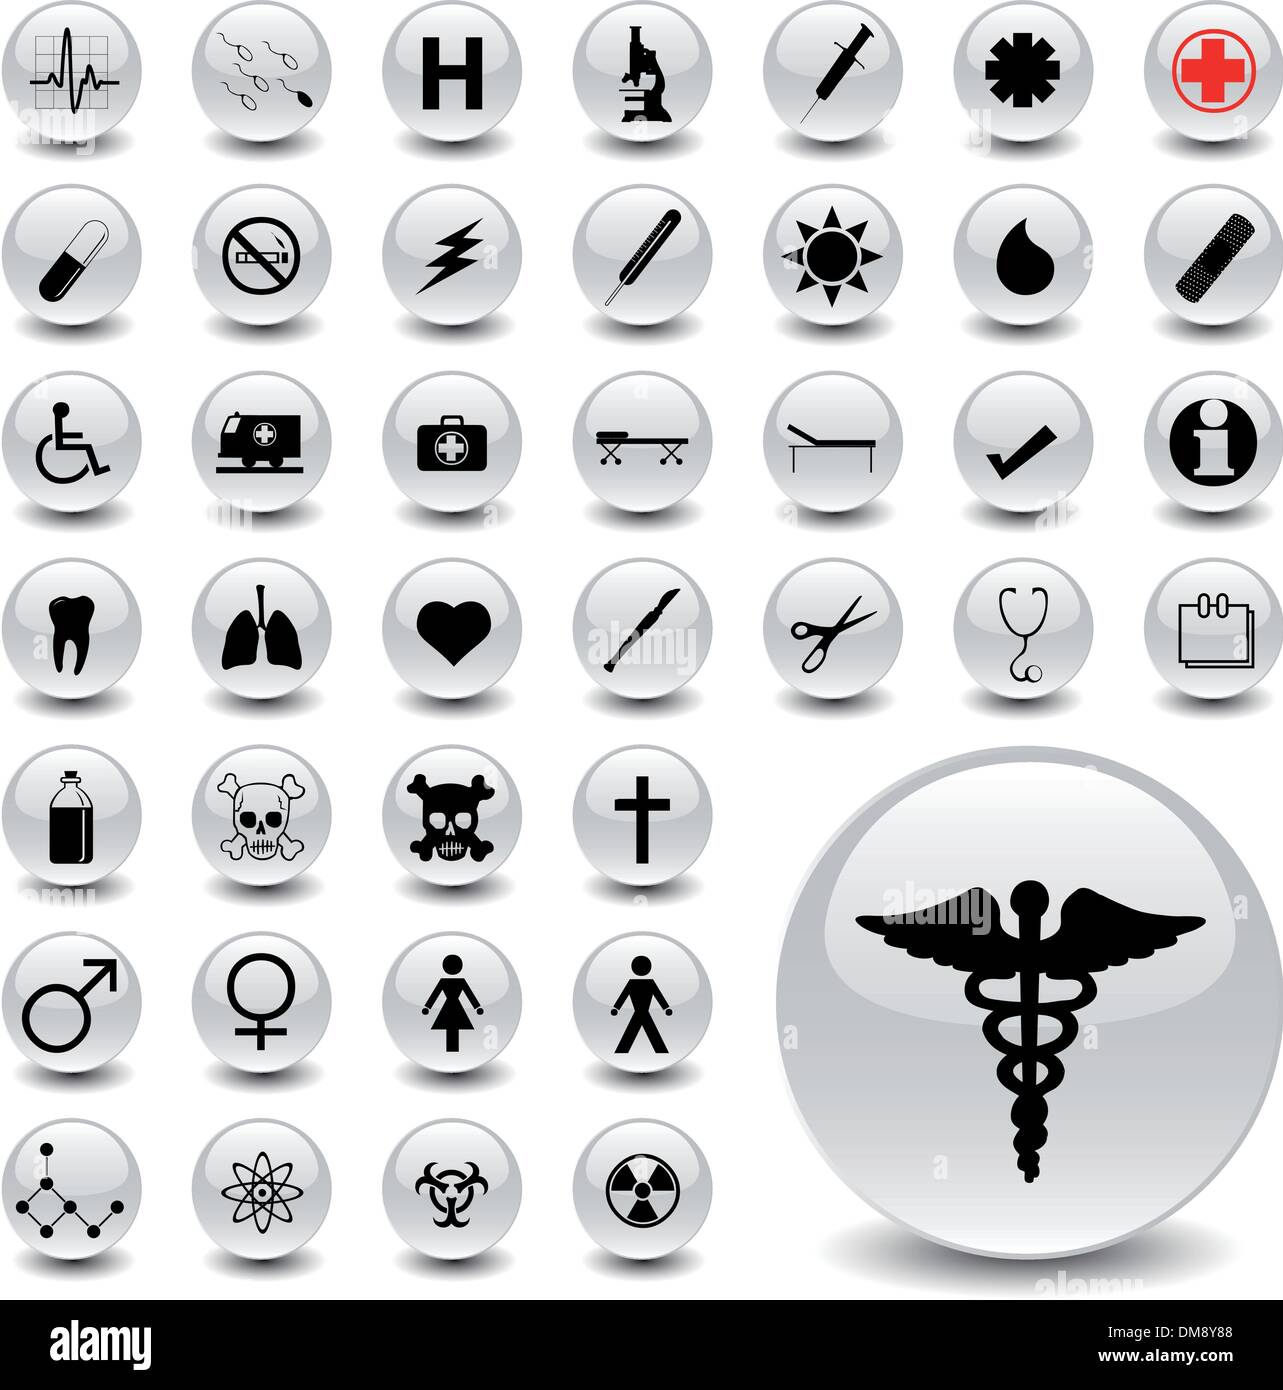 medical icons Stock Vector